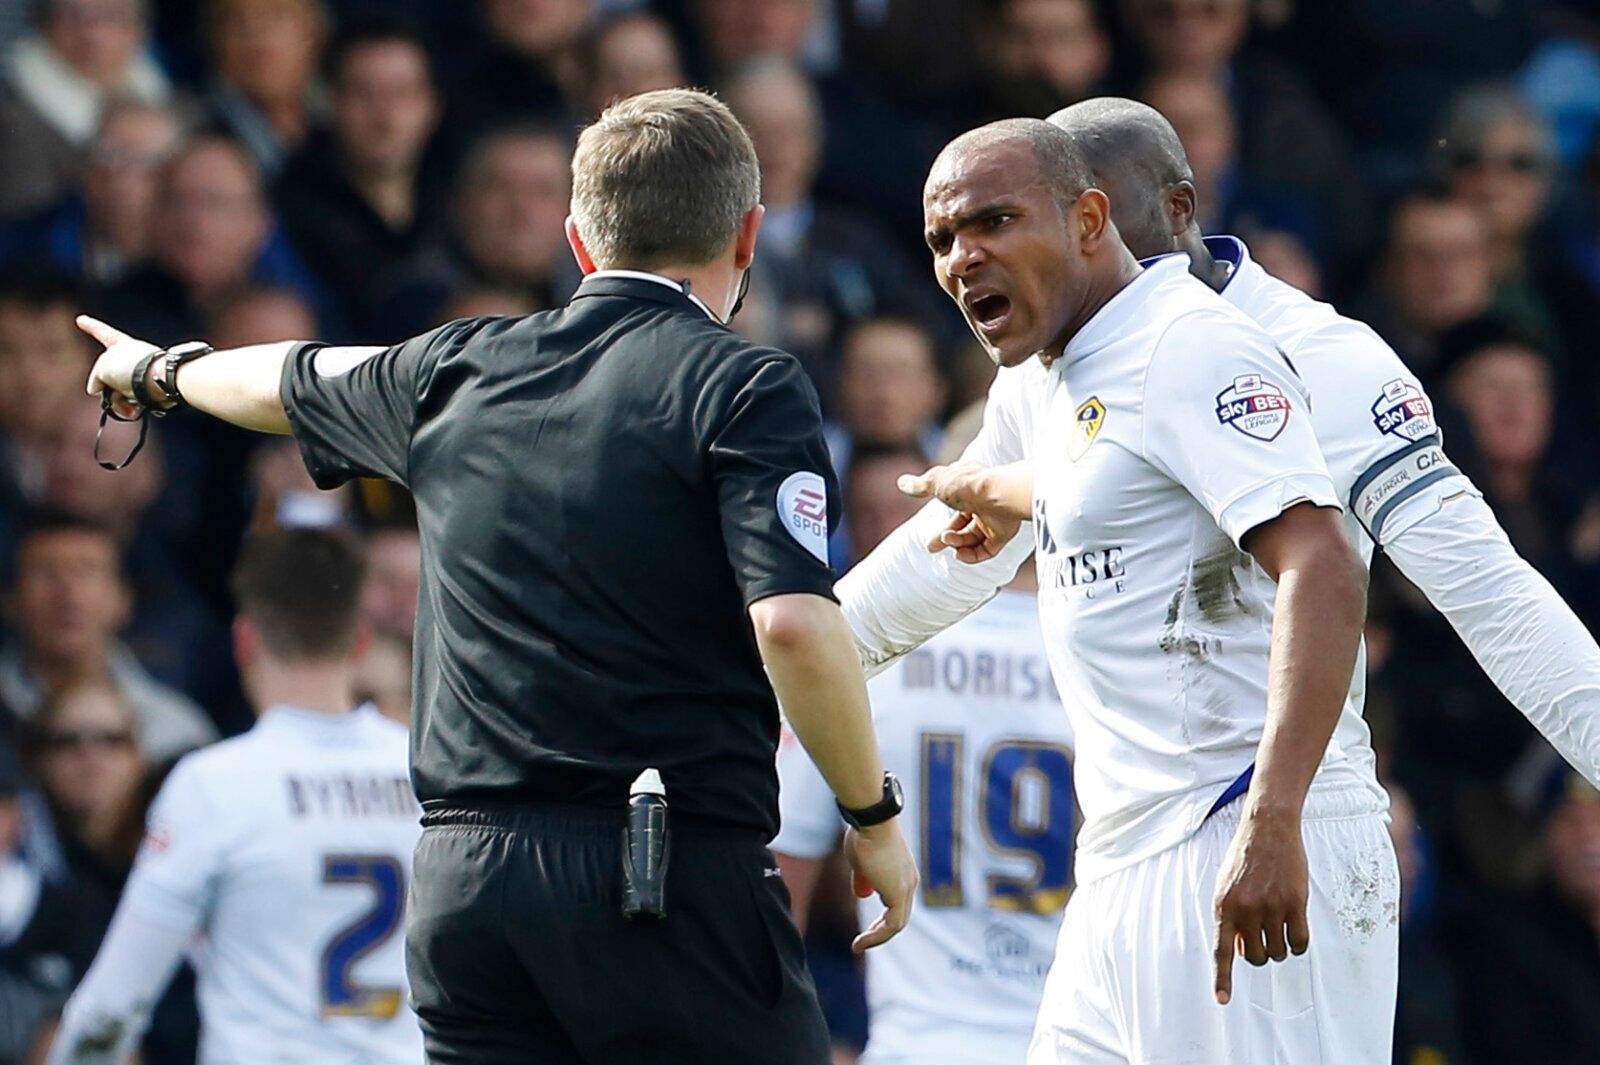 Football - Leeds United v Blackburn Rovers - Sky Bet Football League Championship - Elland Road - 4/4/15 
Leeds United's Rodolph Austin (R) remonstrates with Referee Gary Sutton after being sent off 
Mandatory Credit: Action Images / Craig Brough 
Livepic 
EDITORIAL USE ONLY. No use with unauthorized audio, video, data, fixture lists, club/league logos or 